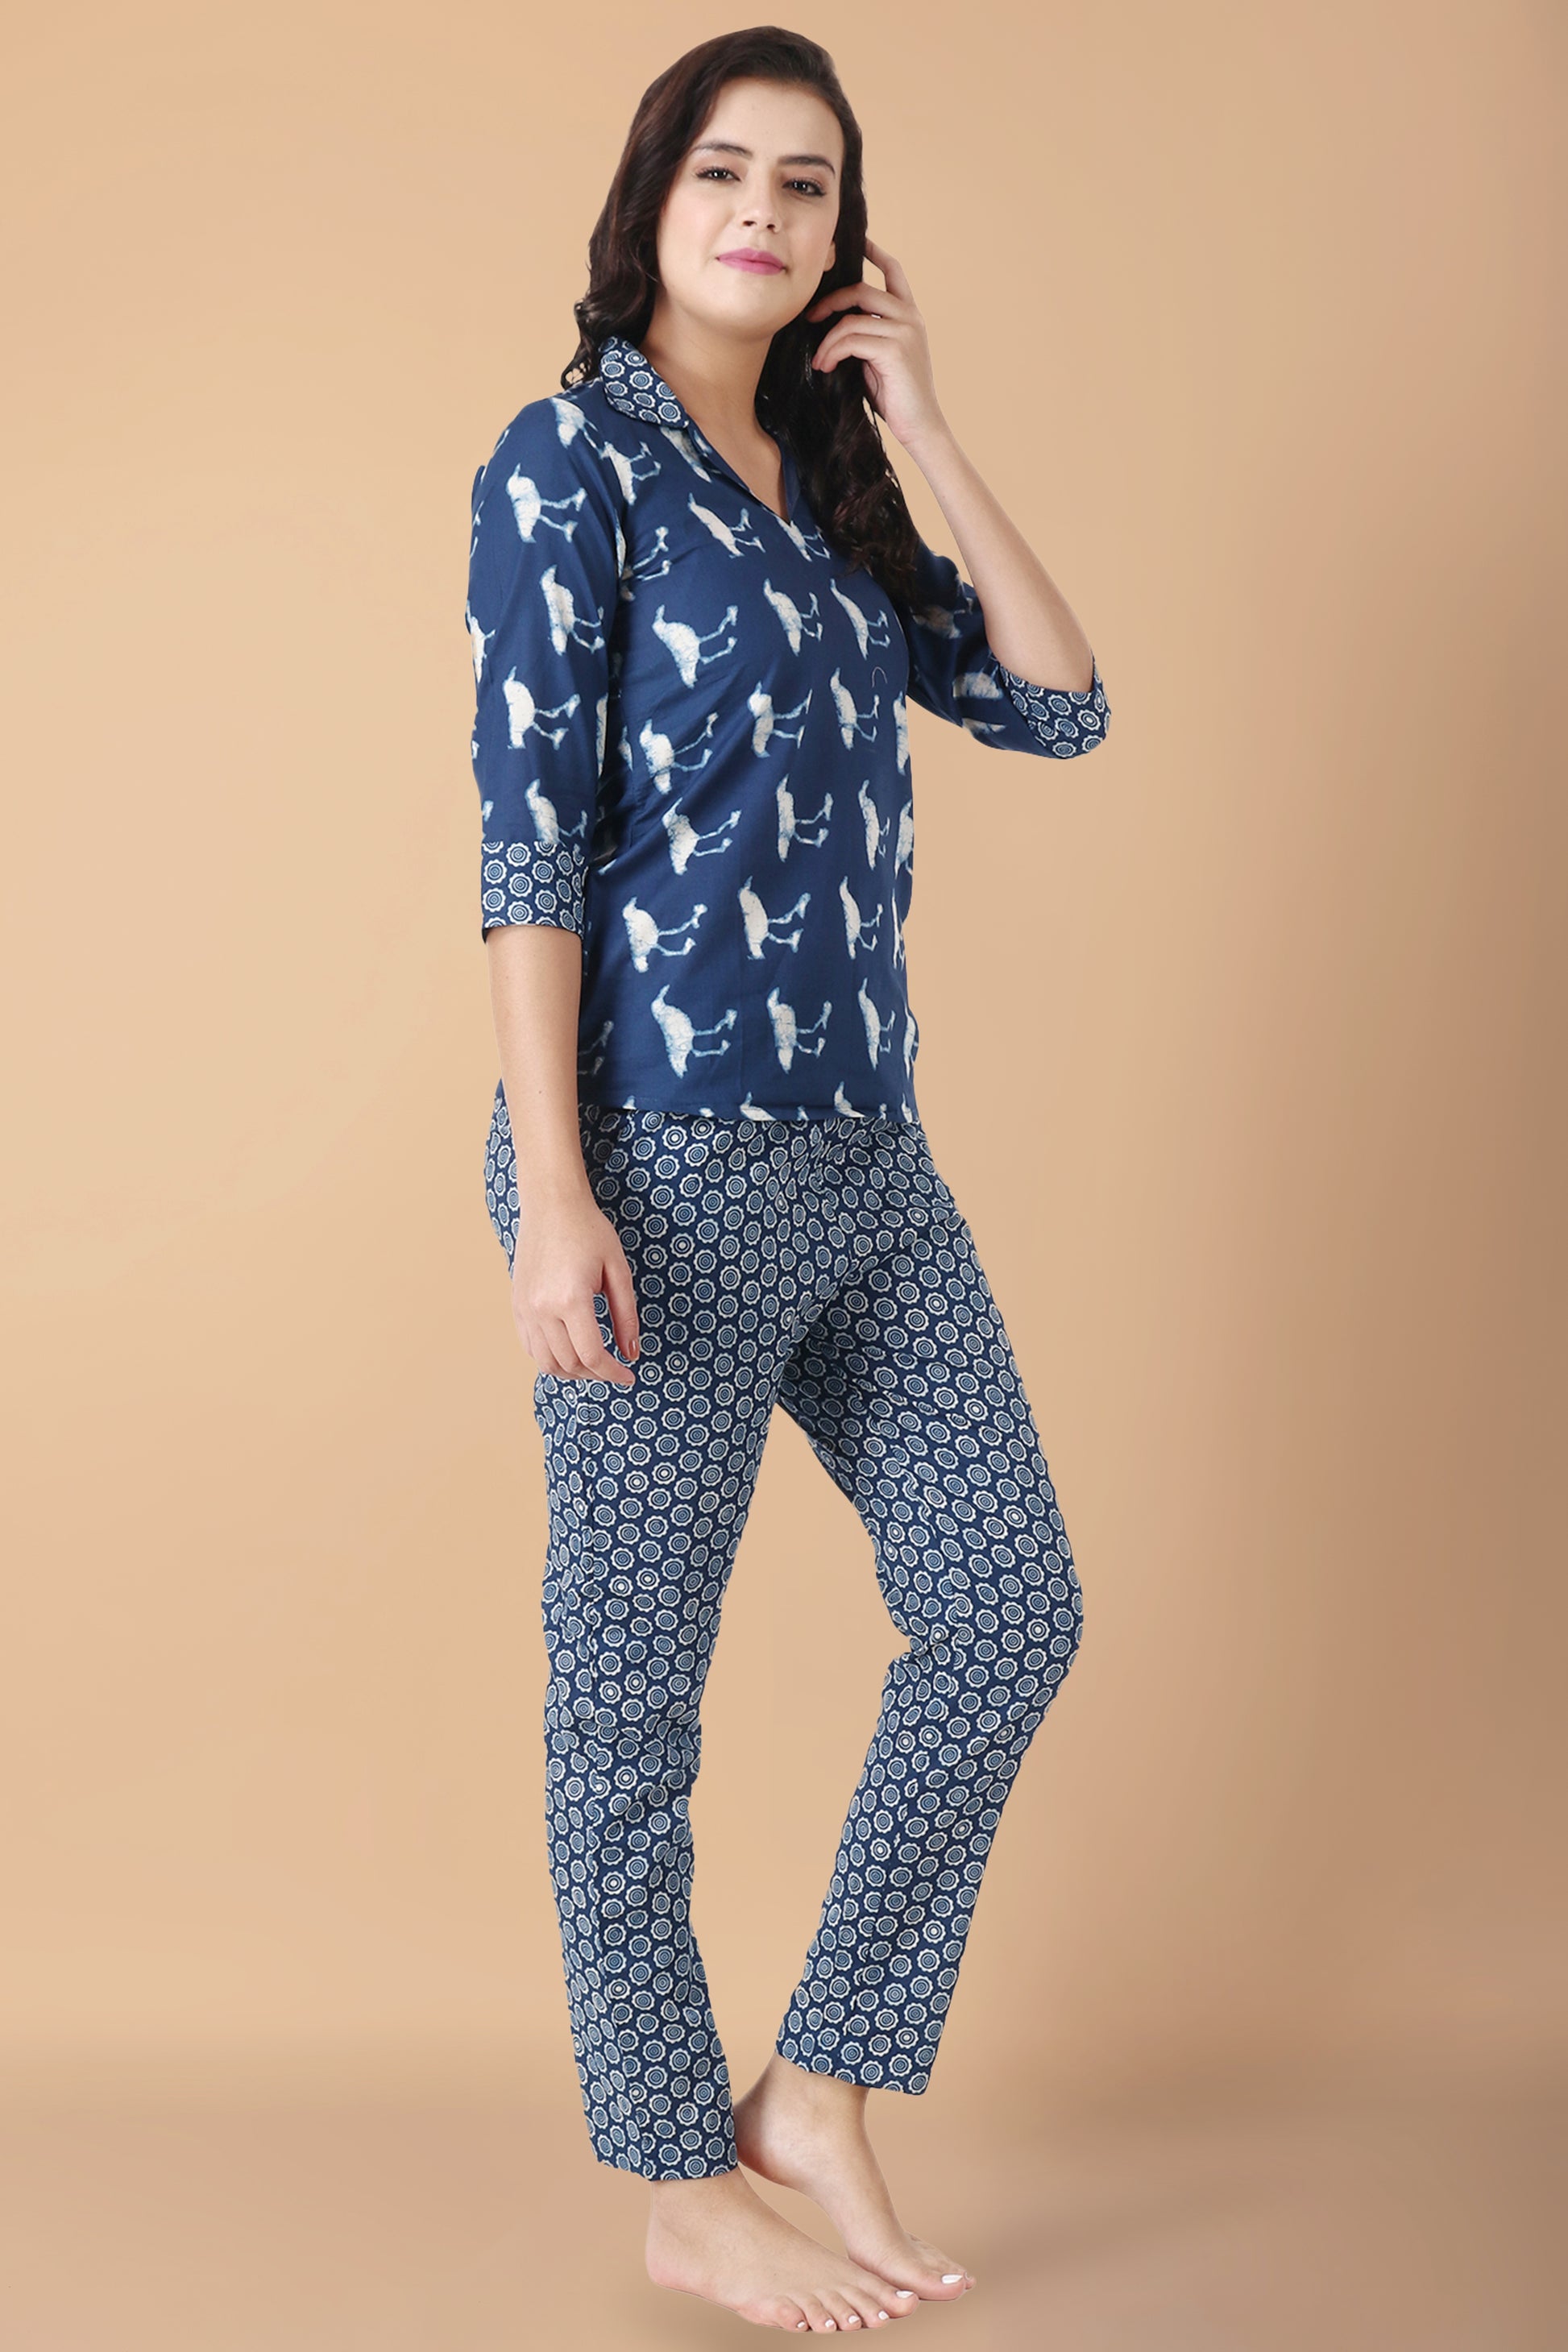 Plus Size Lace Pajamas to Lounge In - Natalie in the City